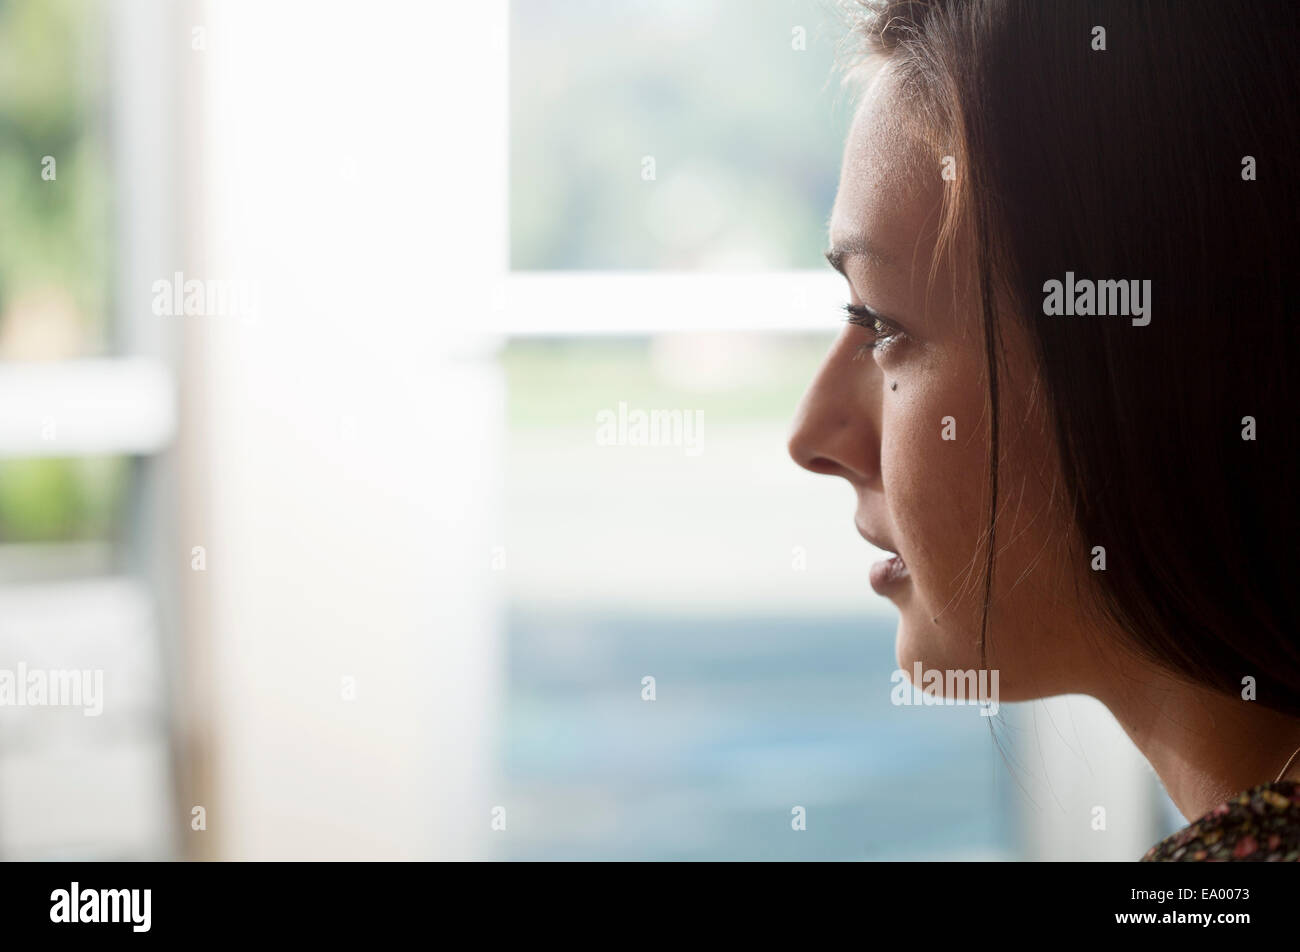 Close up portrait of young woman gazing out of window Stock Photo